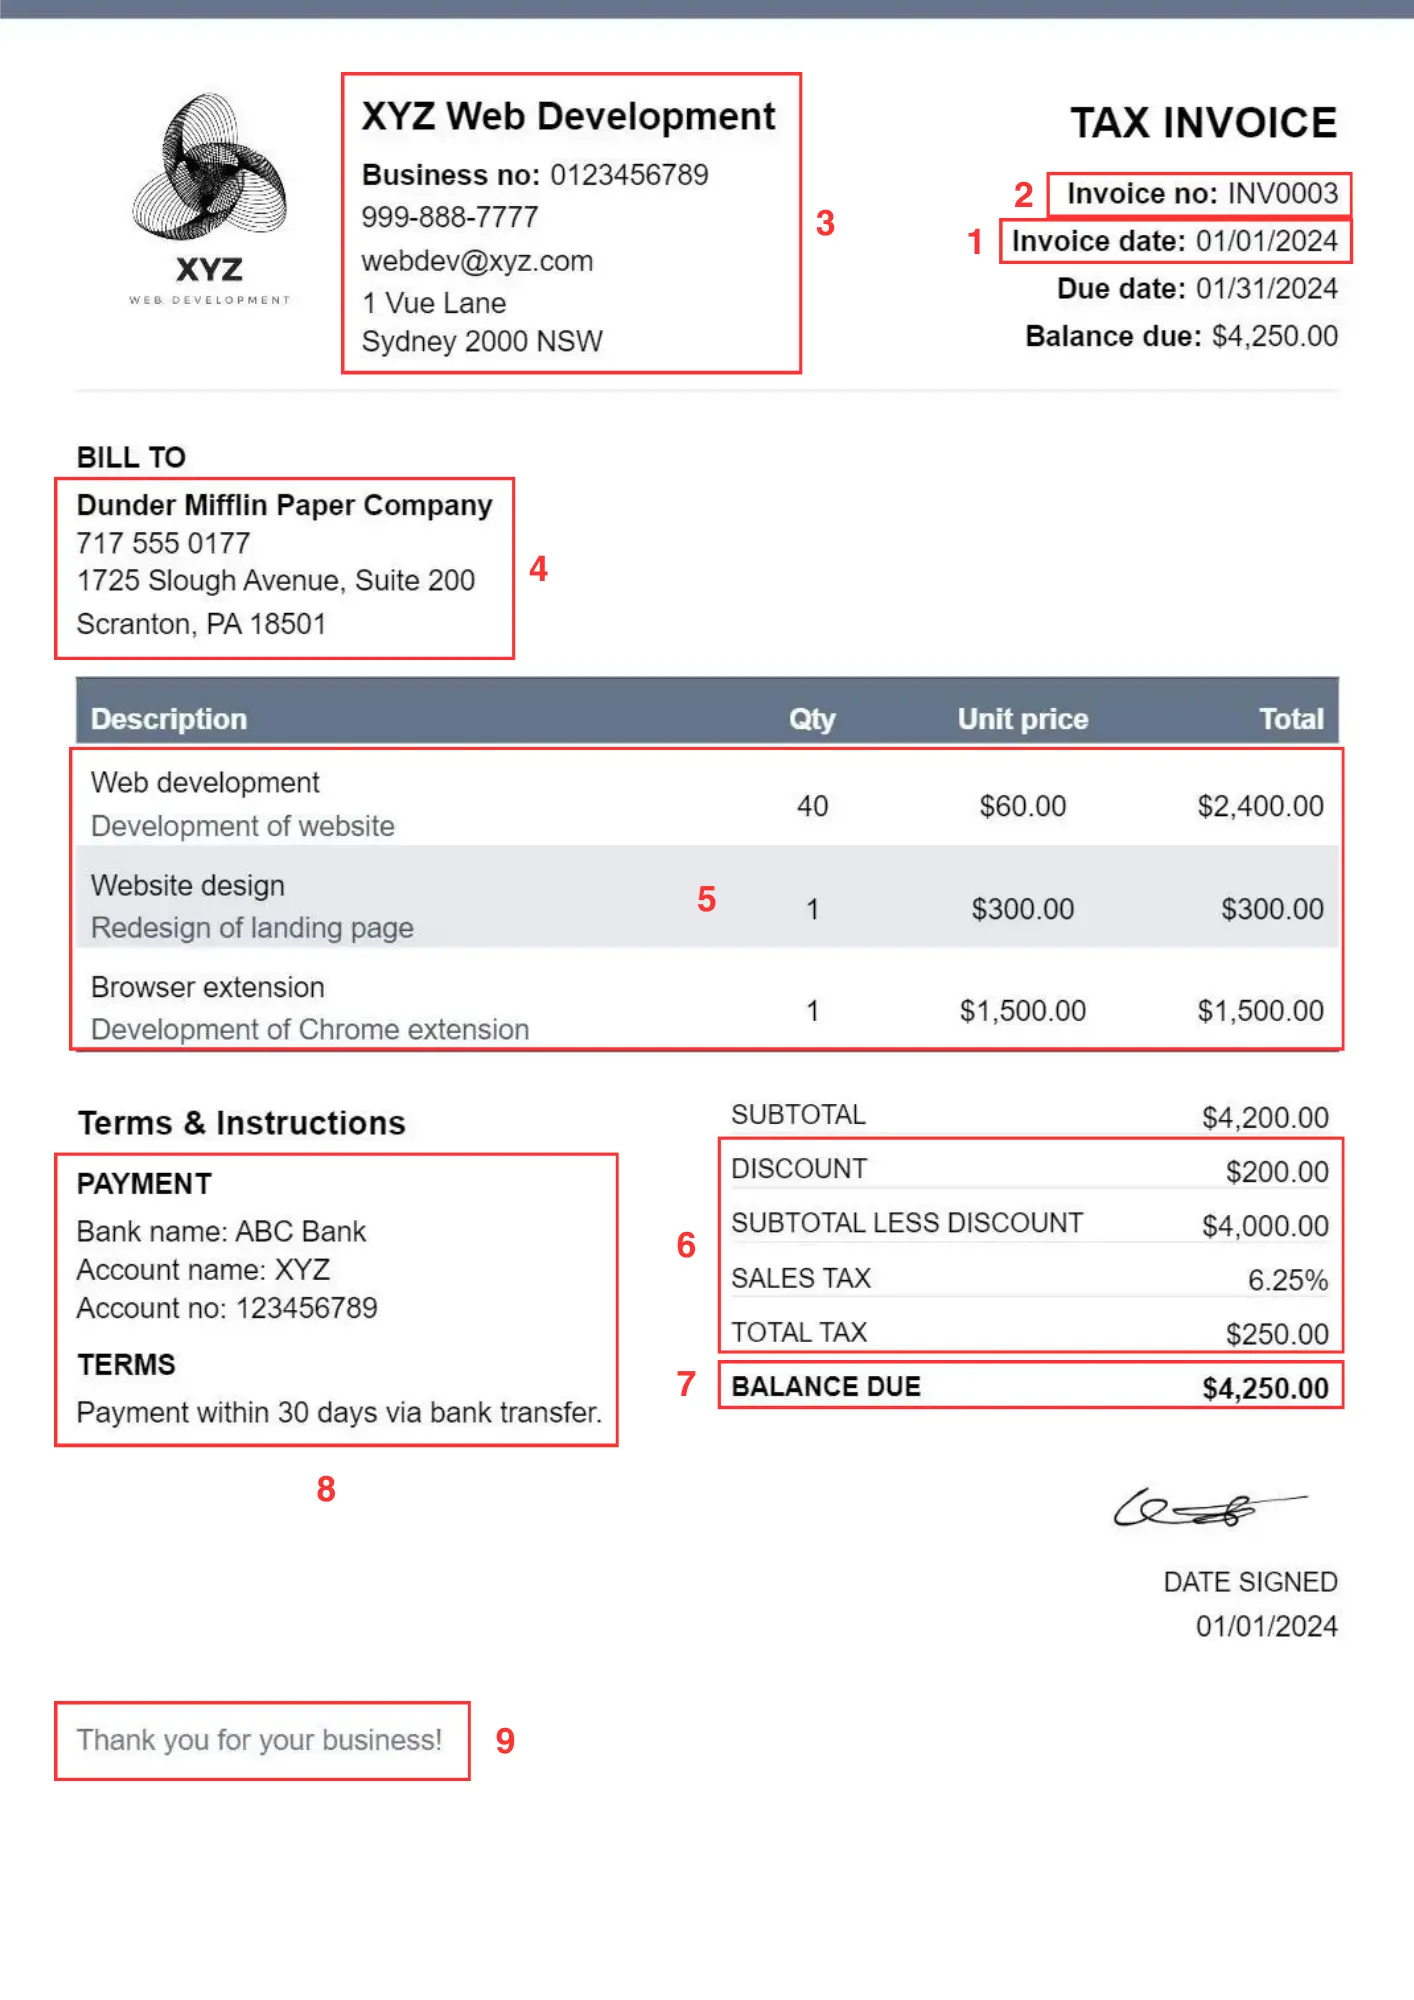 key invoice elements example - how to create an invoice